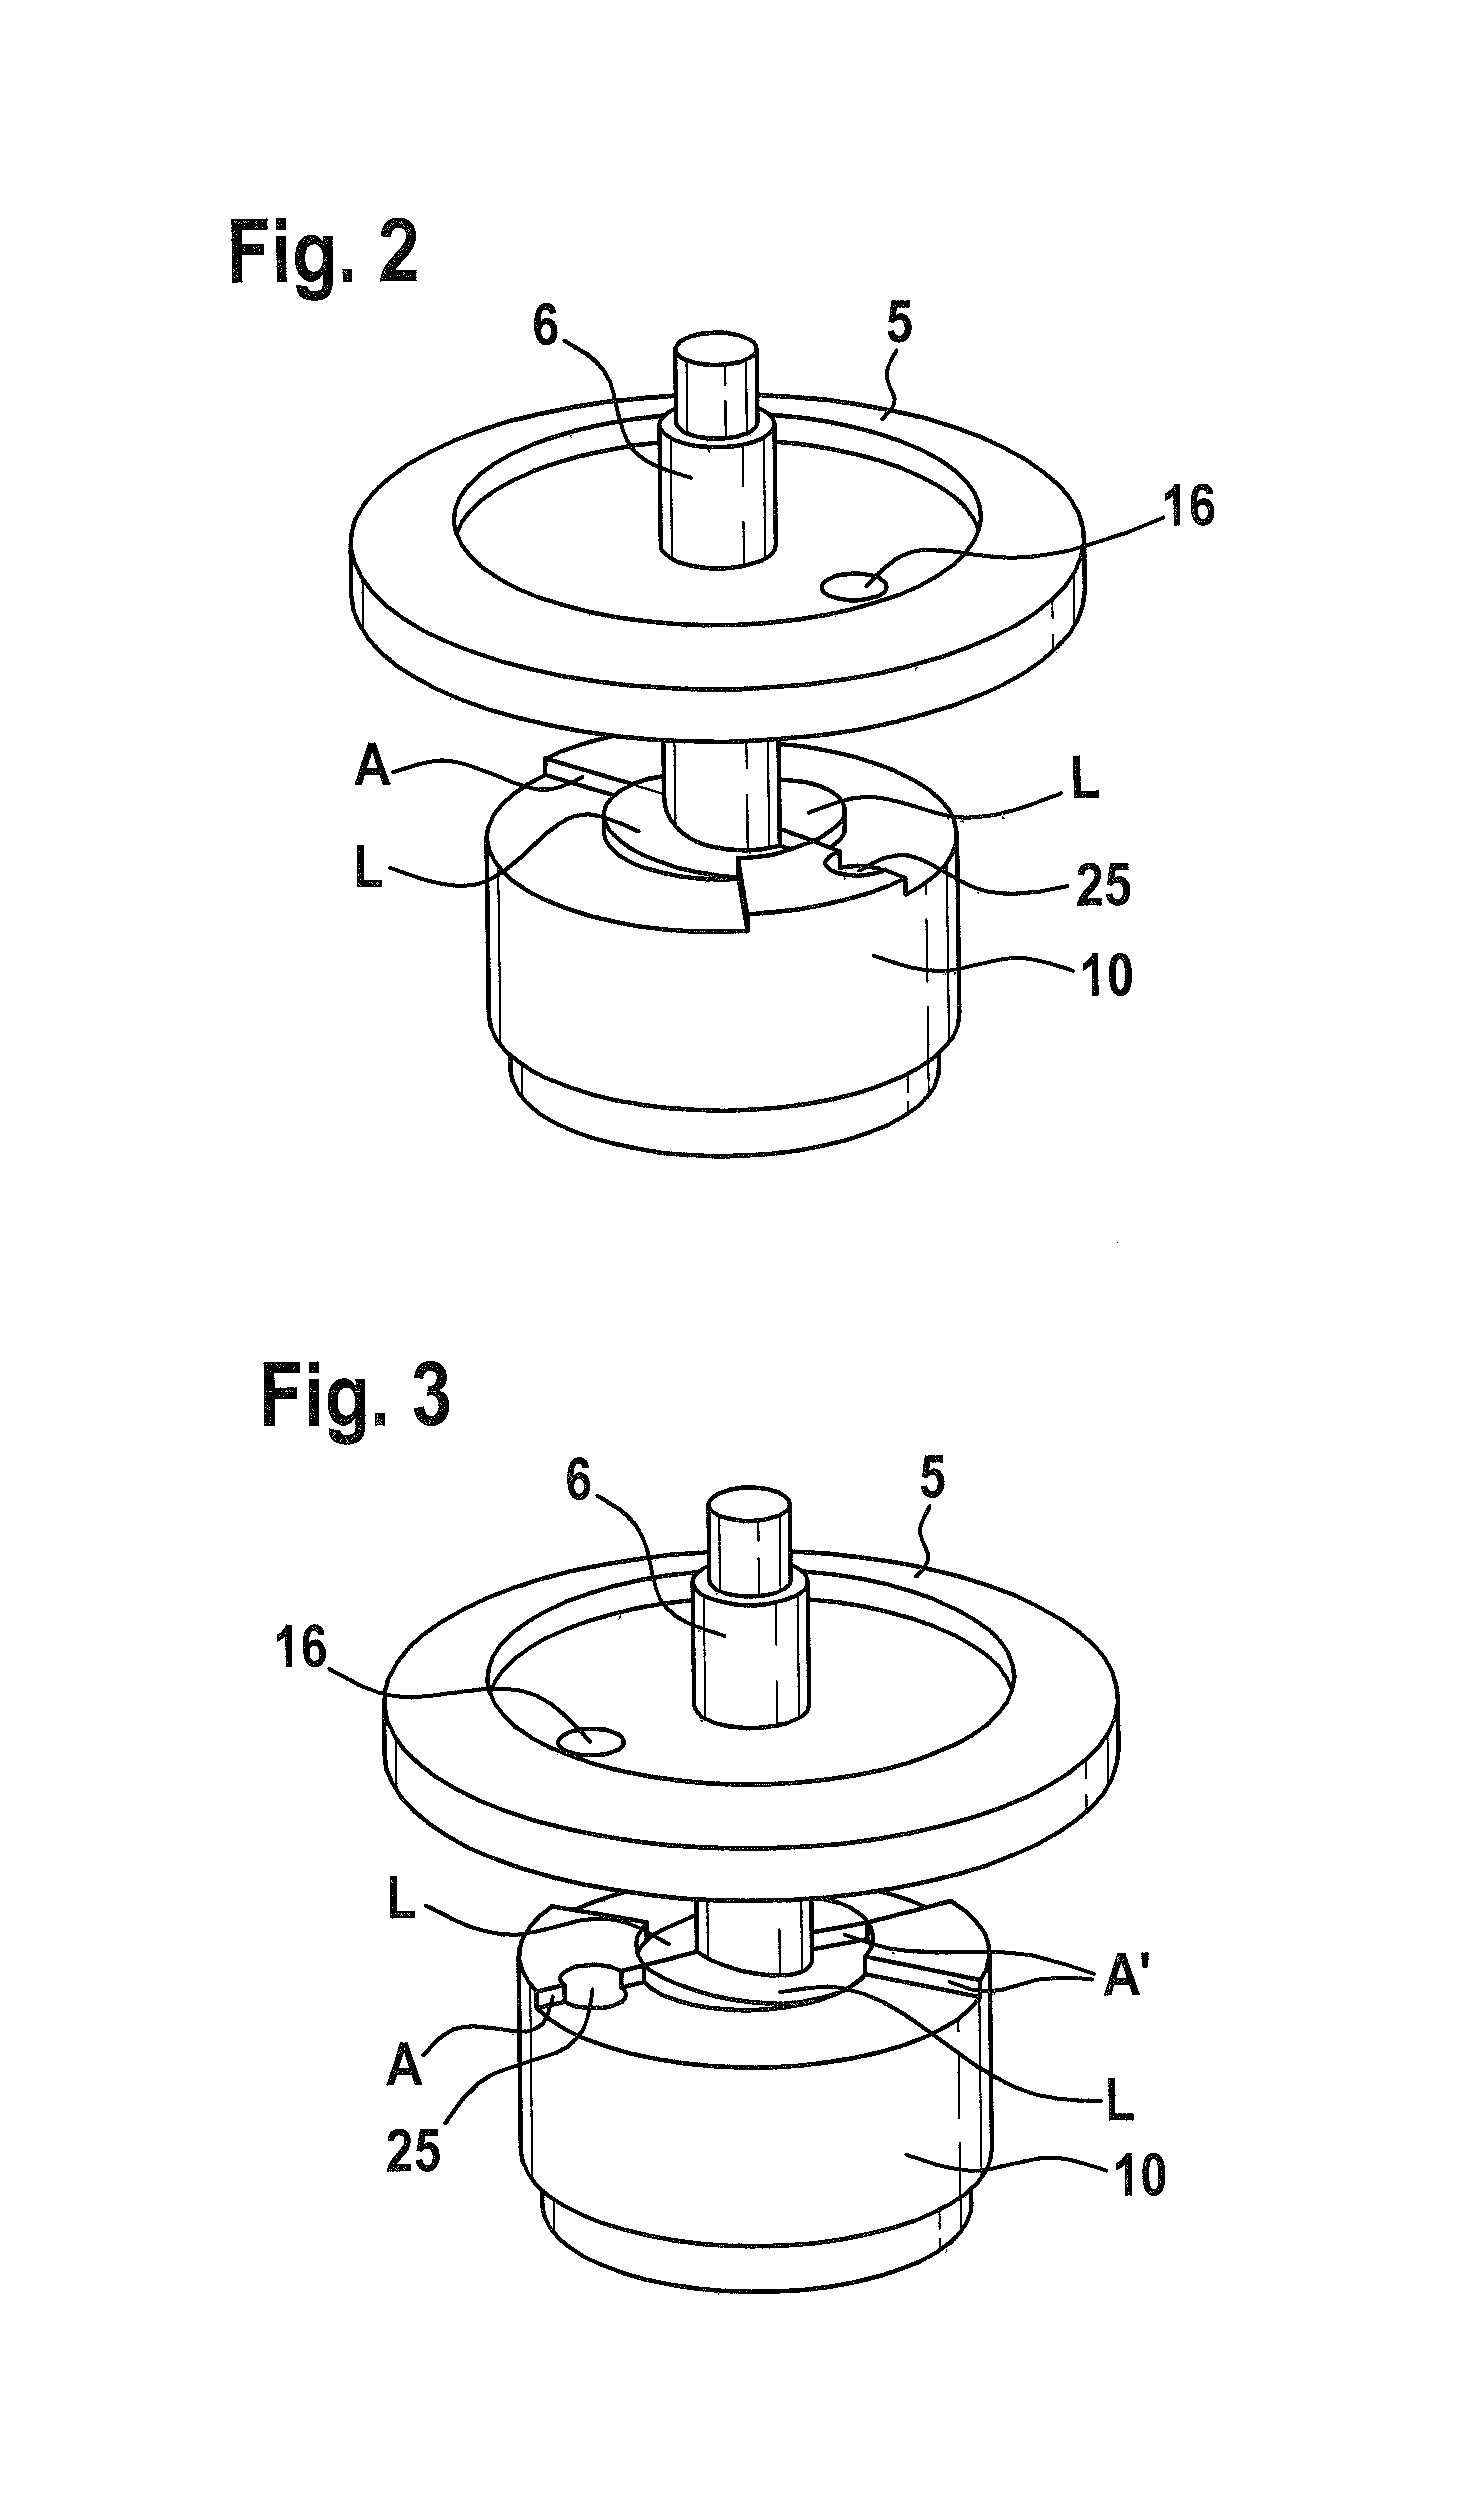 Clamping fixture for detachably fastening a disk-shaped tool